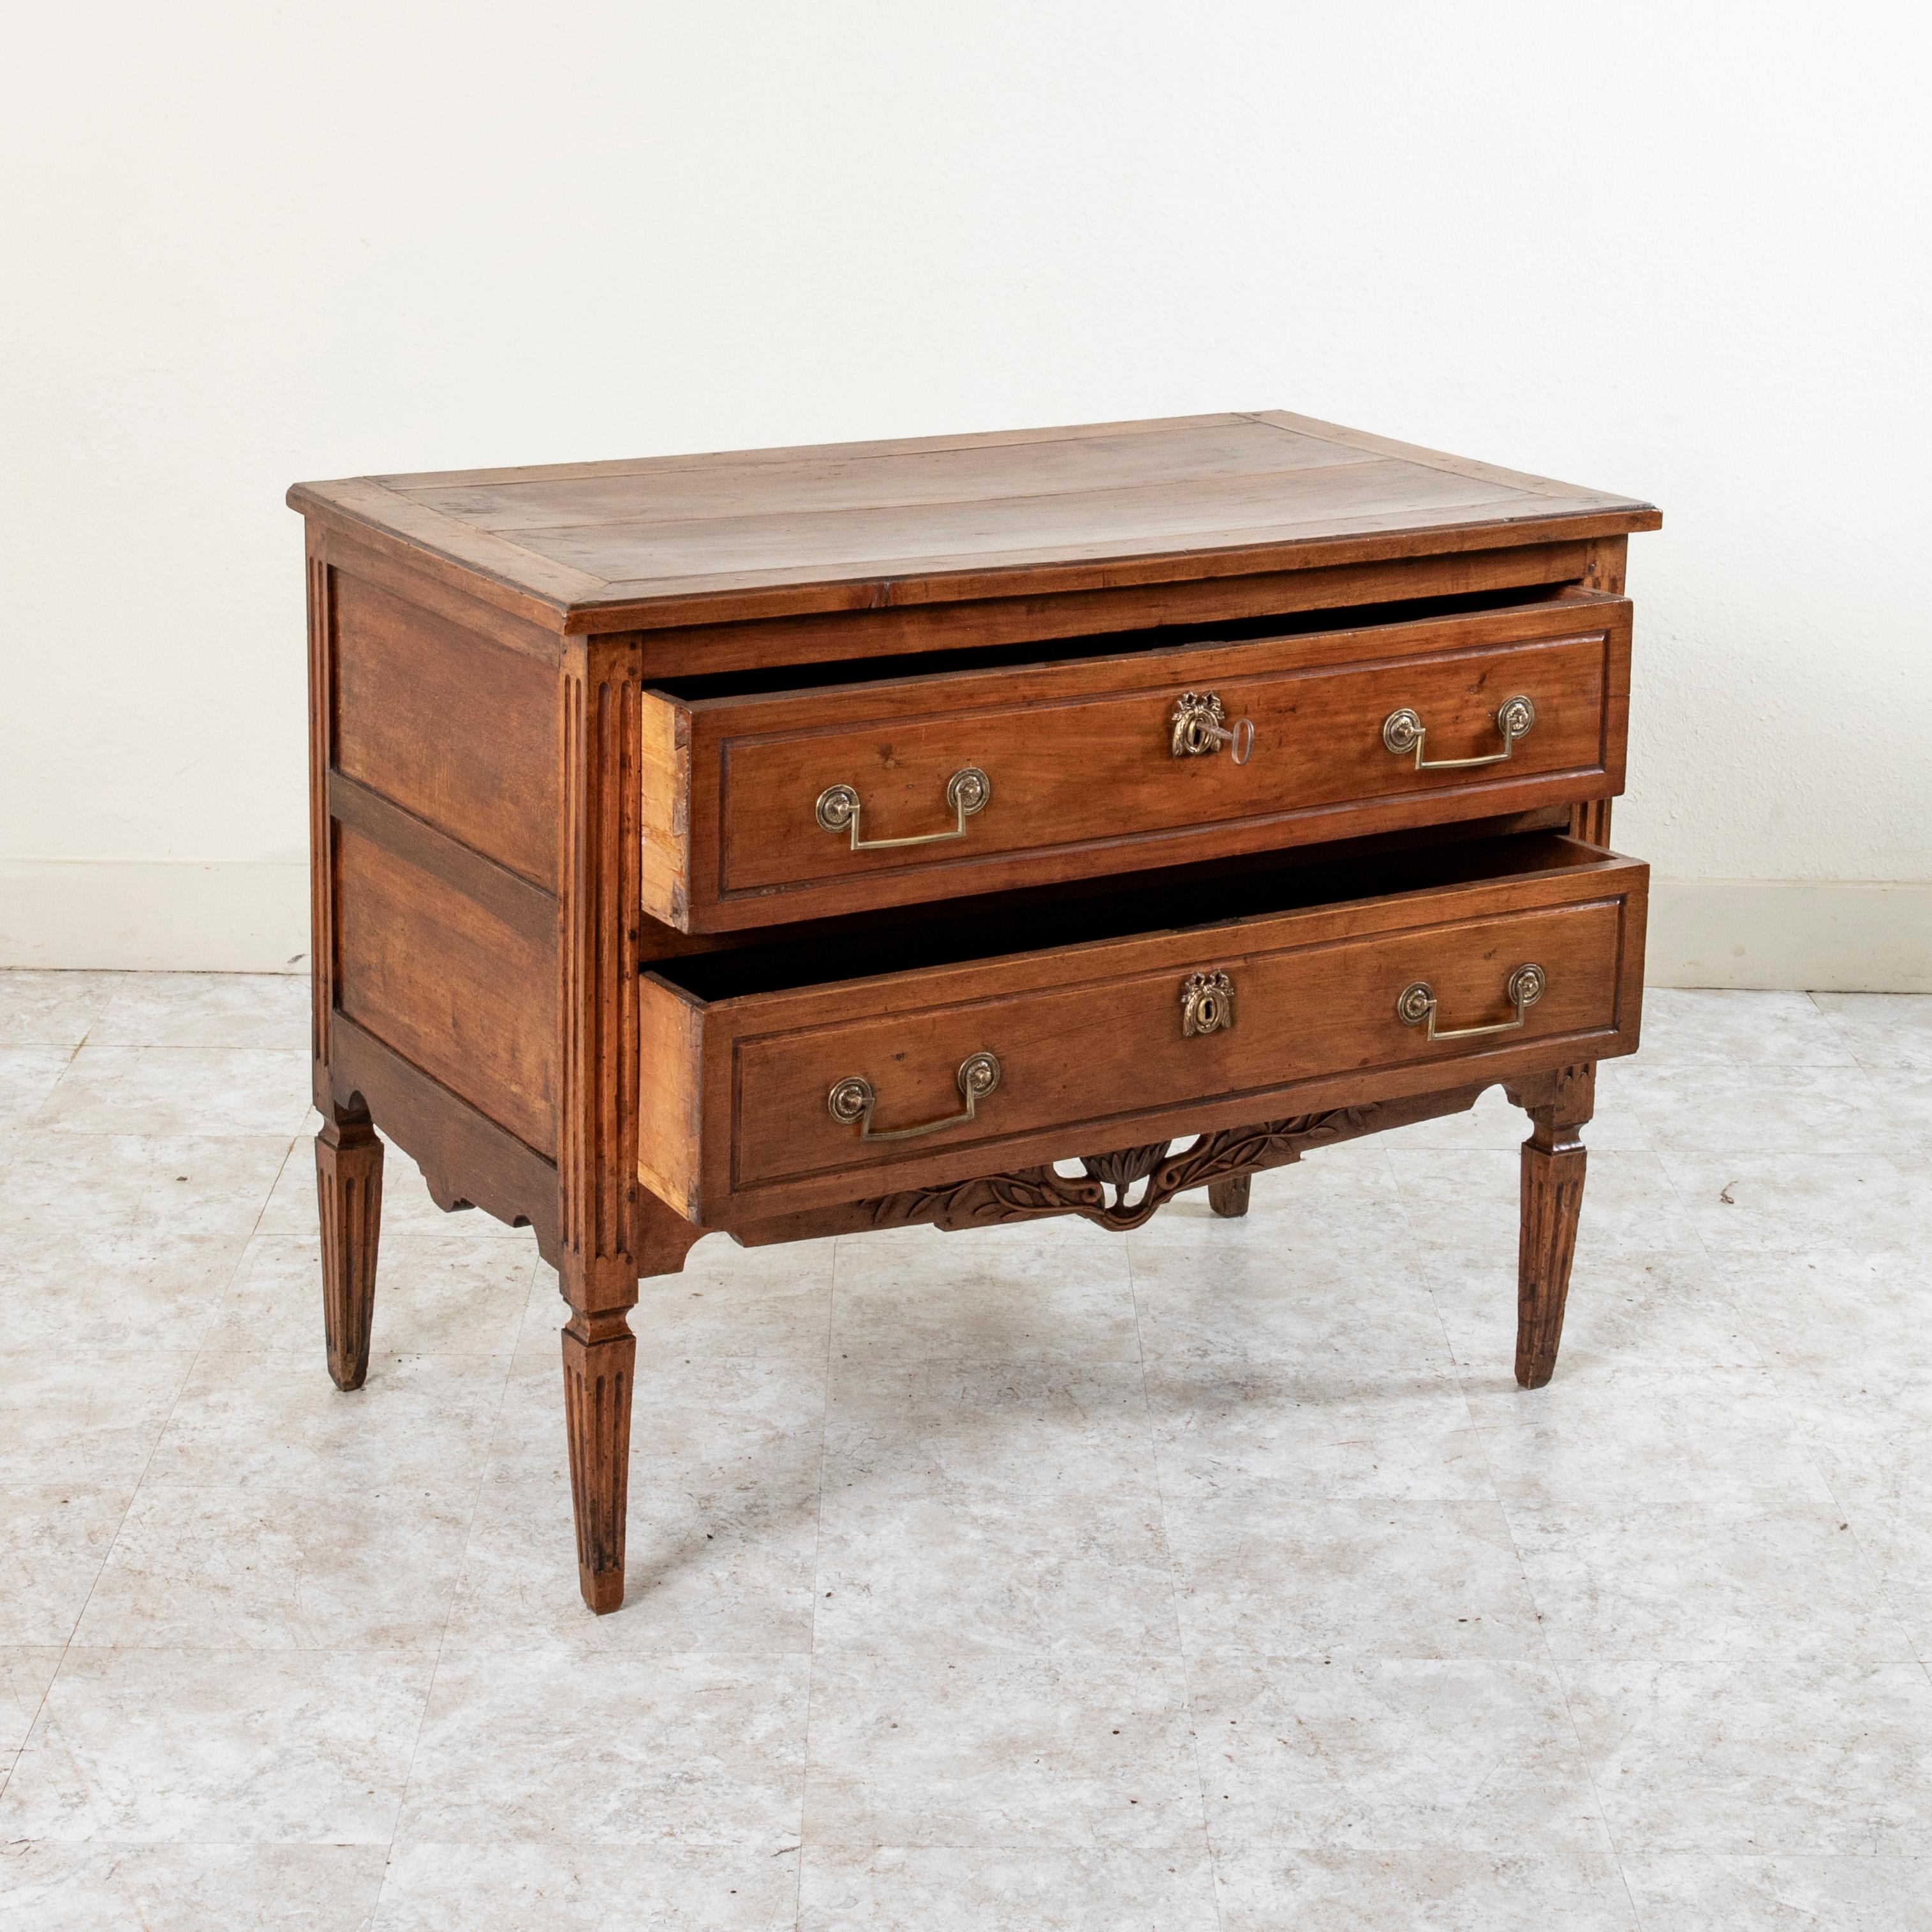 Late 18th Century French Louis XVI Period Walnut Commode or Chest of Drawers 2